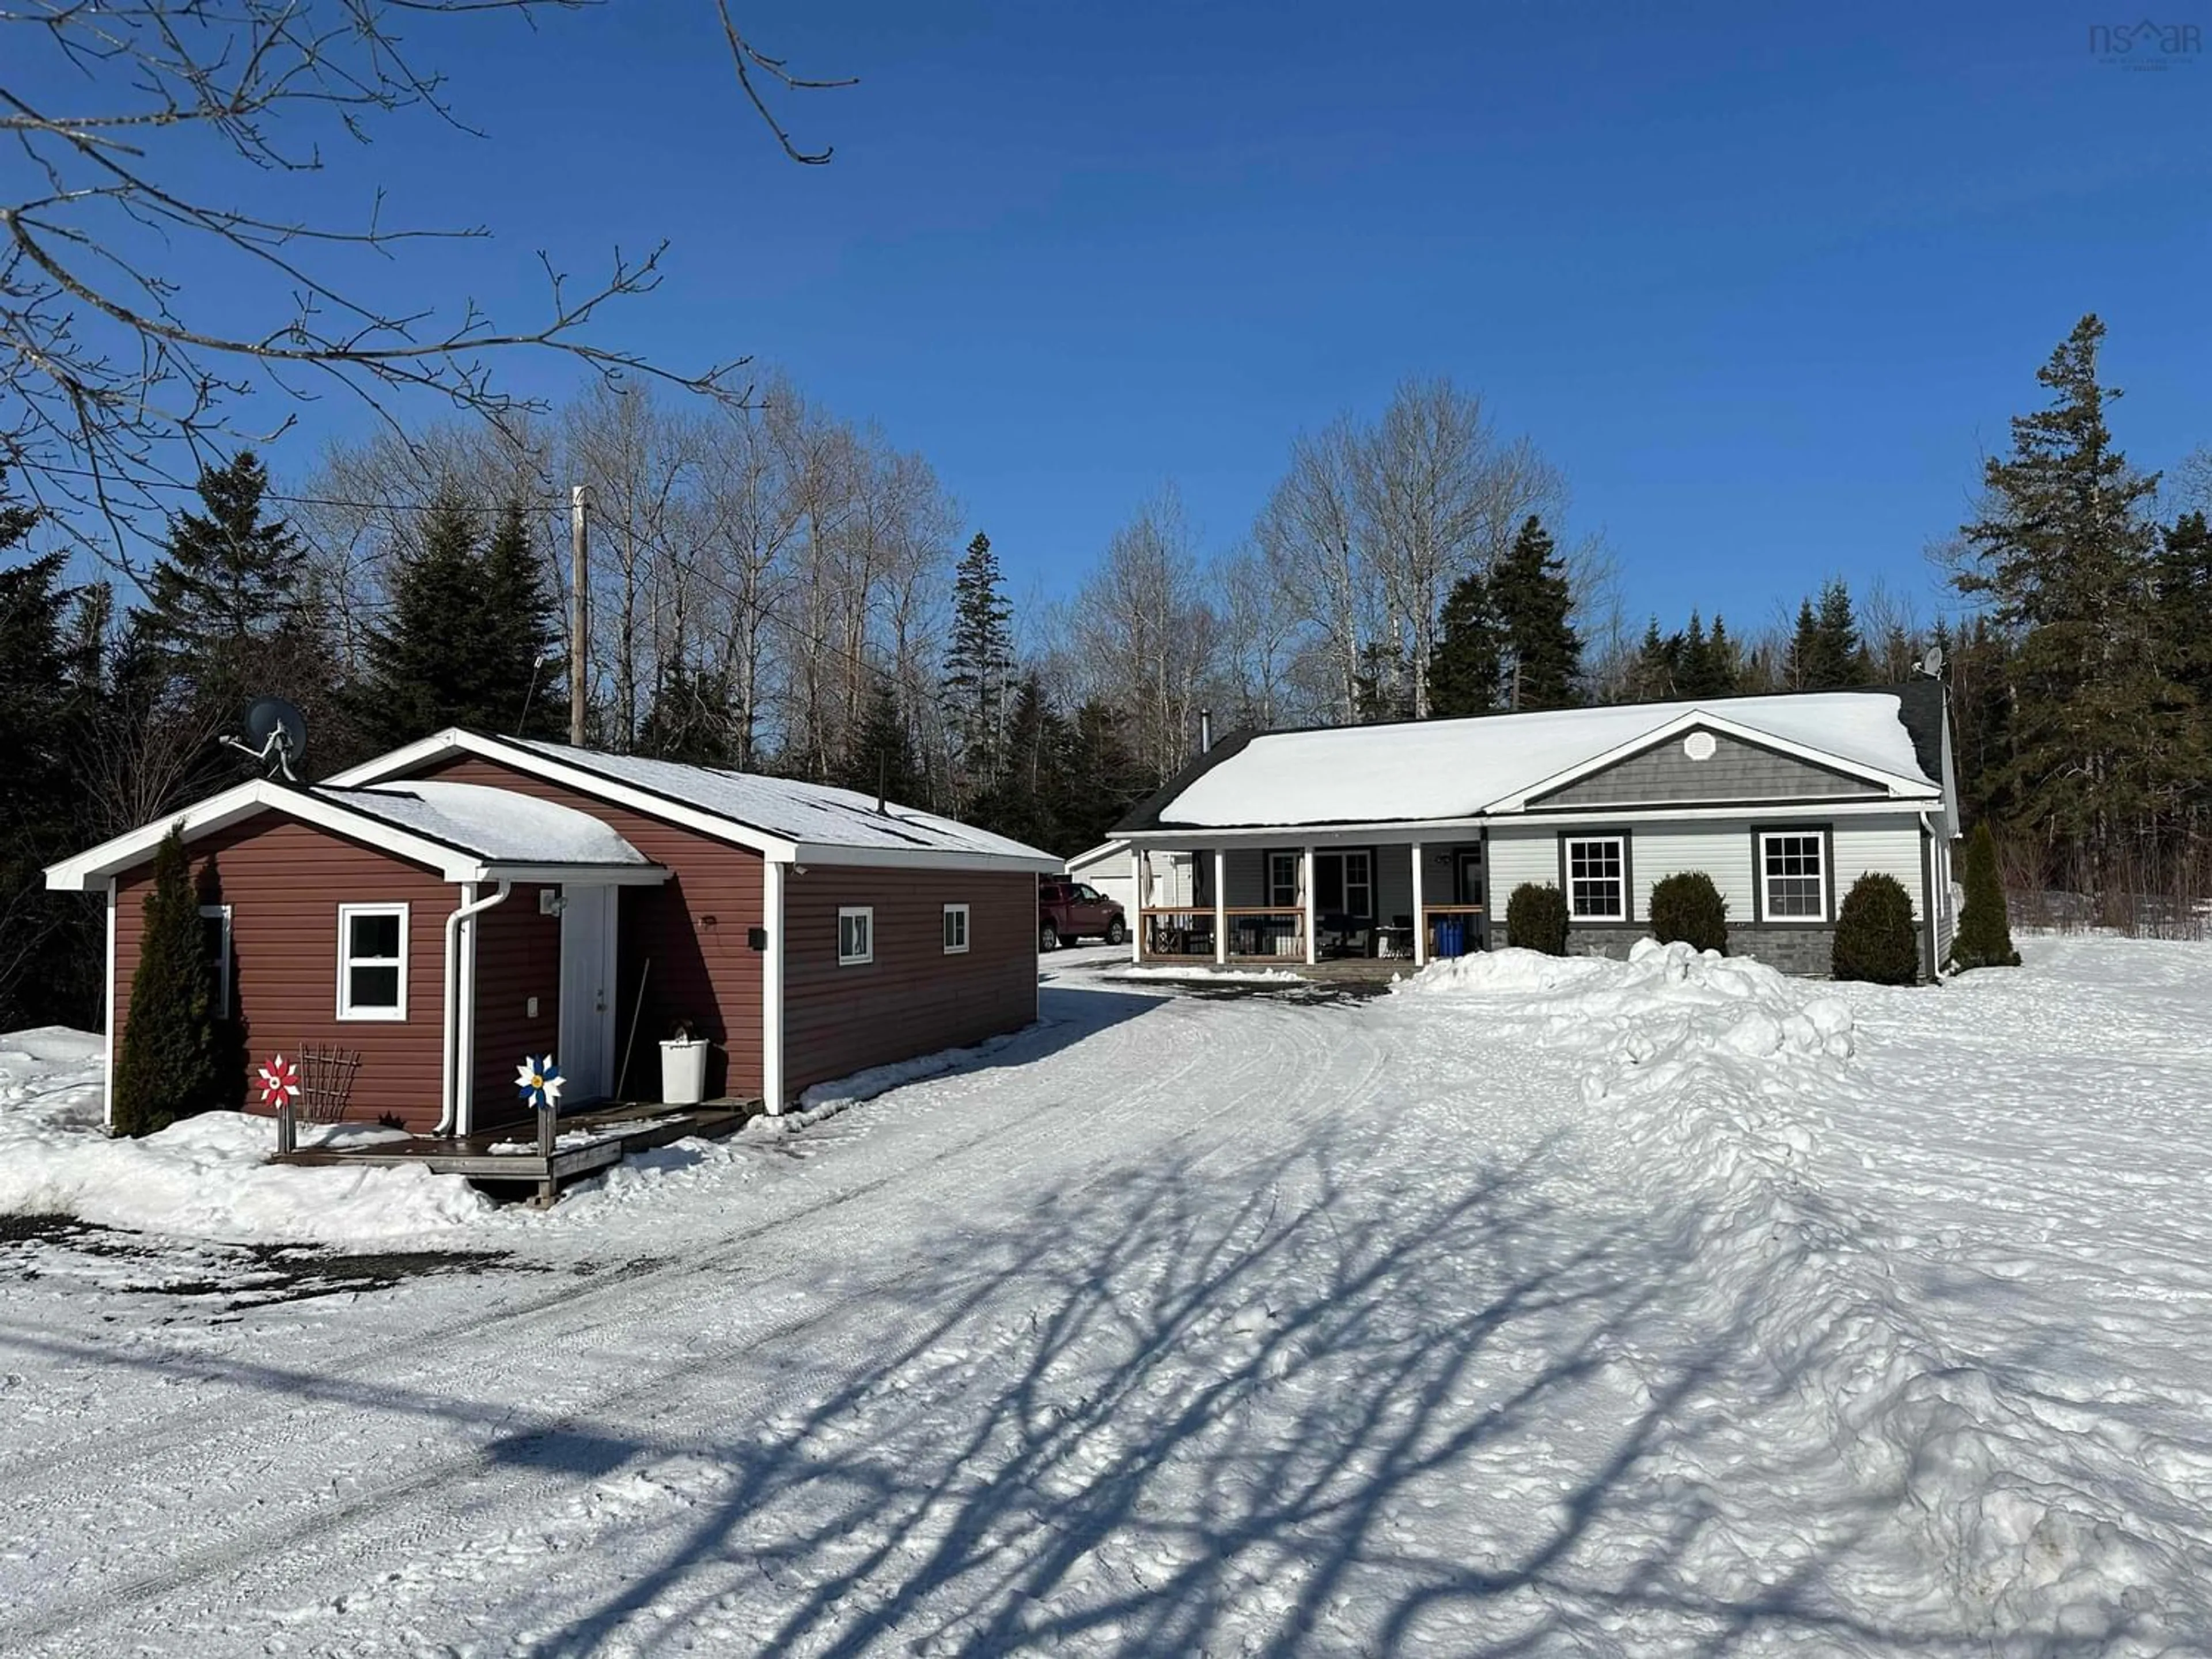 Home with unknown exterior material for 1021 South Rawdon Rd, Hillsvale Nova Scotia B0N 1Z0